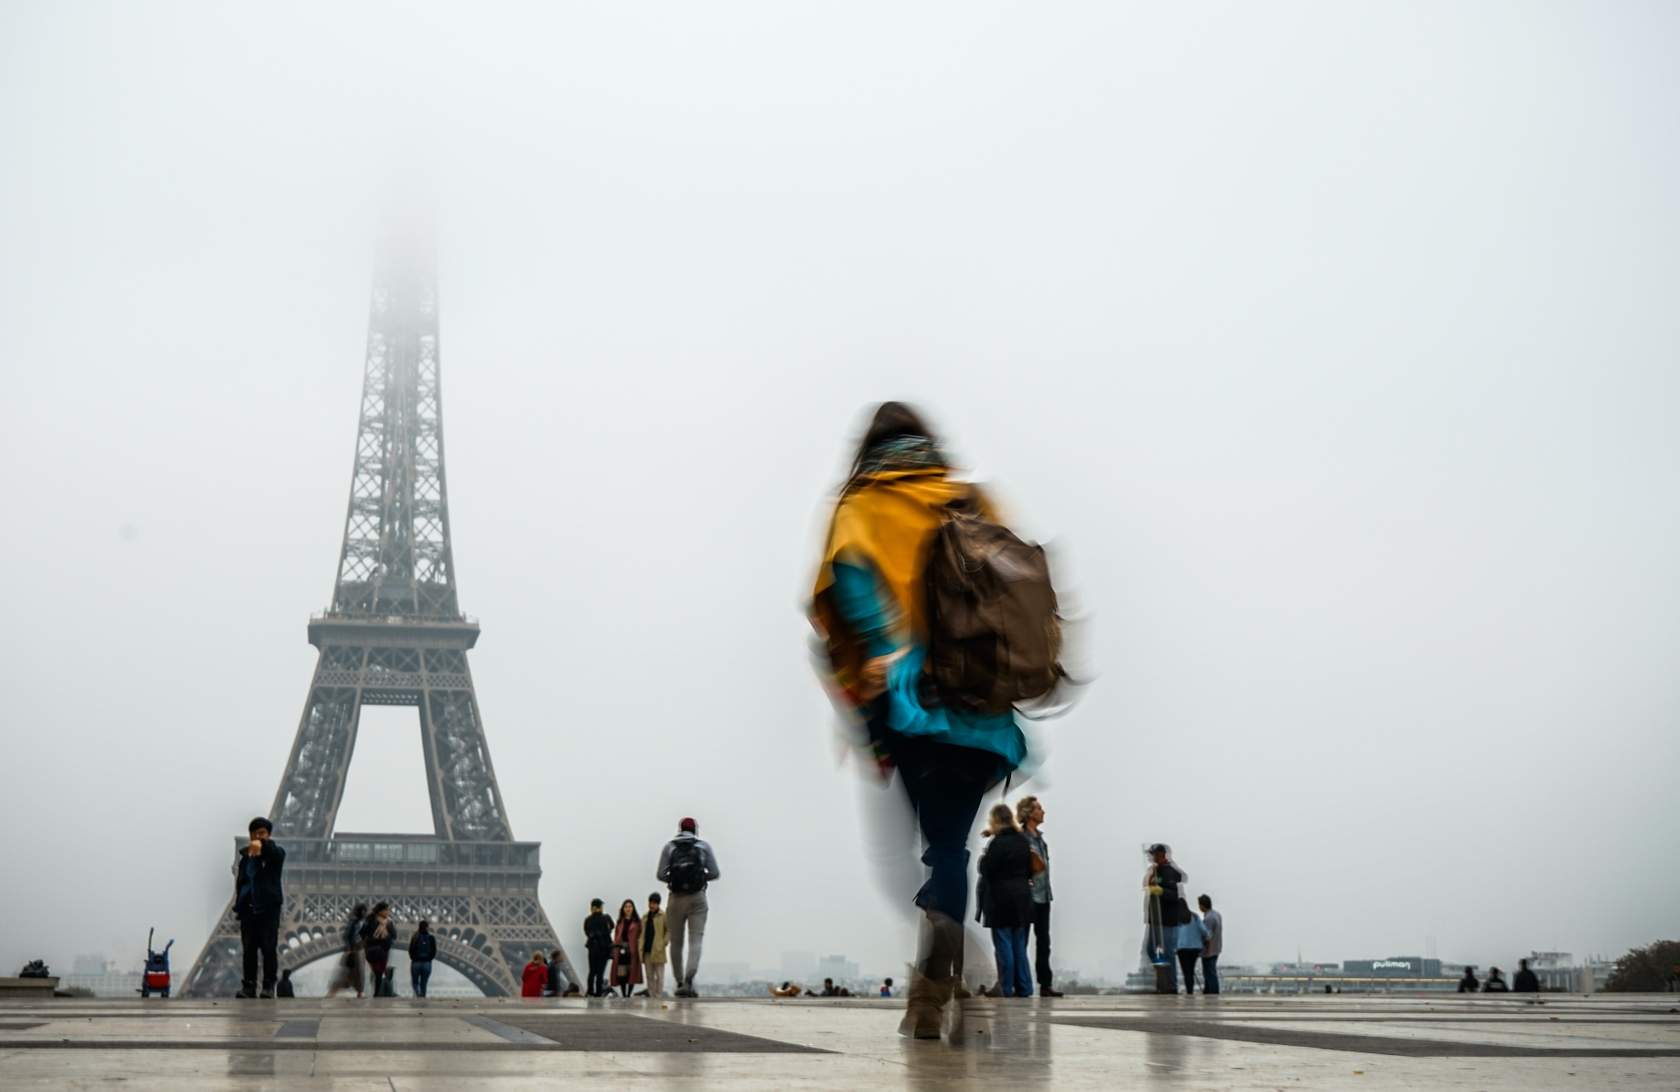 A woman walks past the Eiffel Tower on a foggy day in Paris, capturing RFT0707.